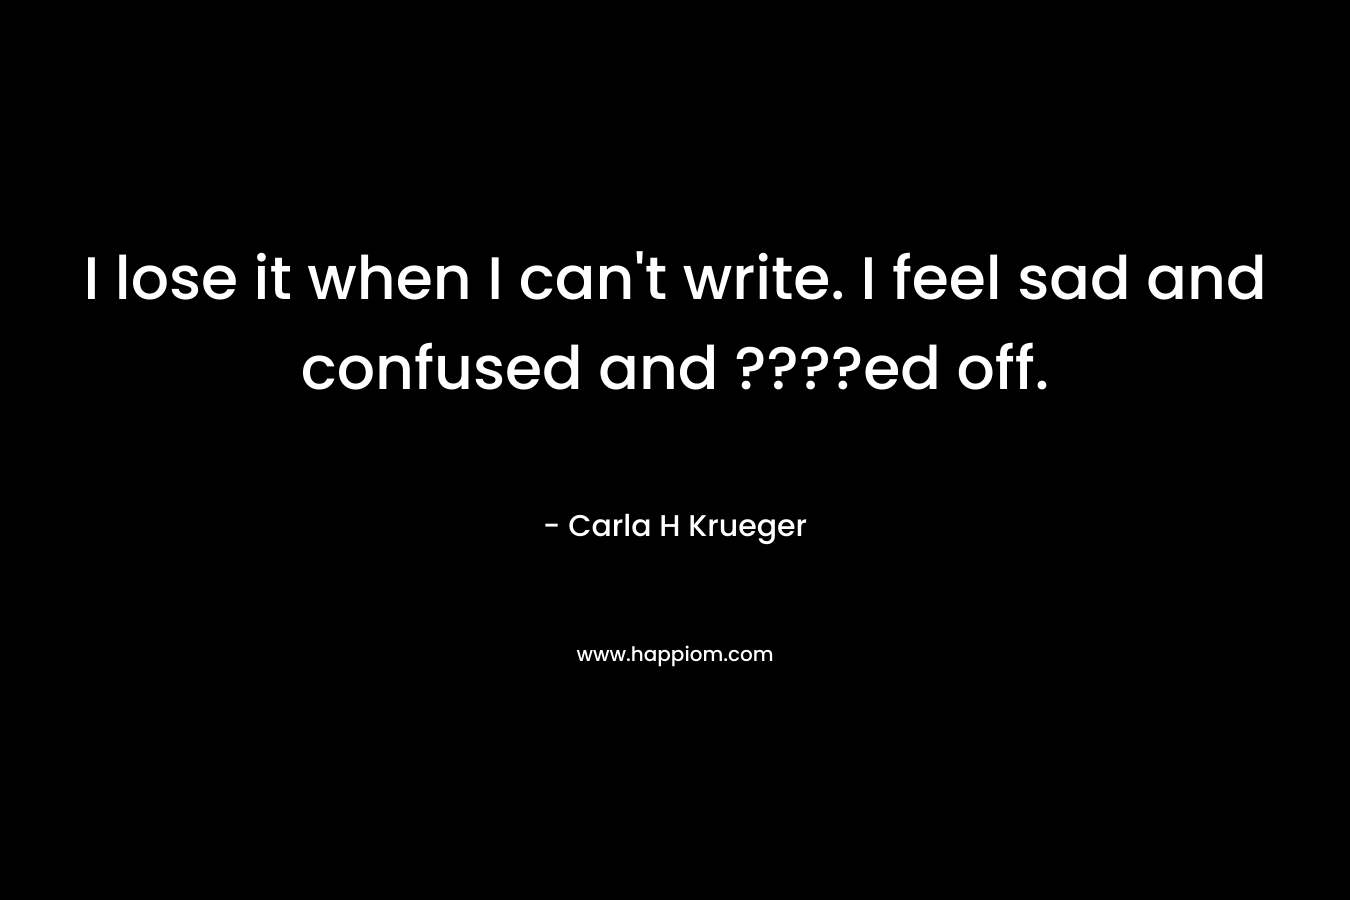 I lose it when I can’t write. I feel sad and confused and ????ed off. – Carla H Krueger